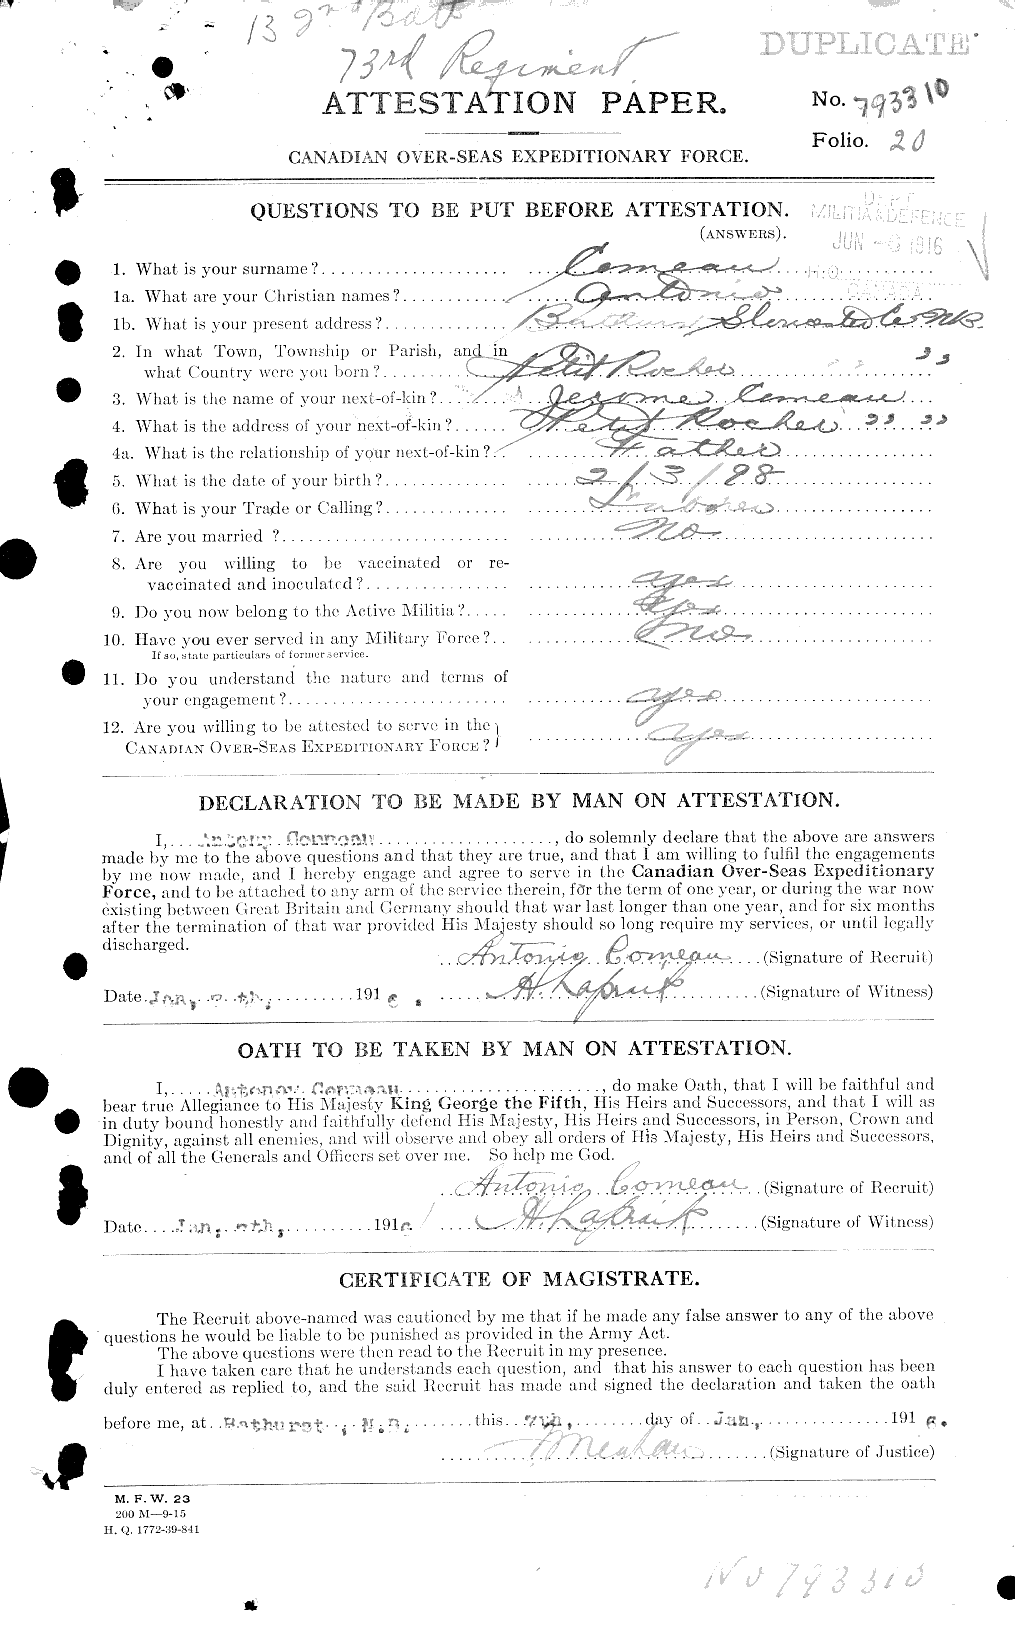 Personnel Records of the First World War - CEF 043911a